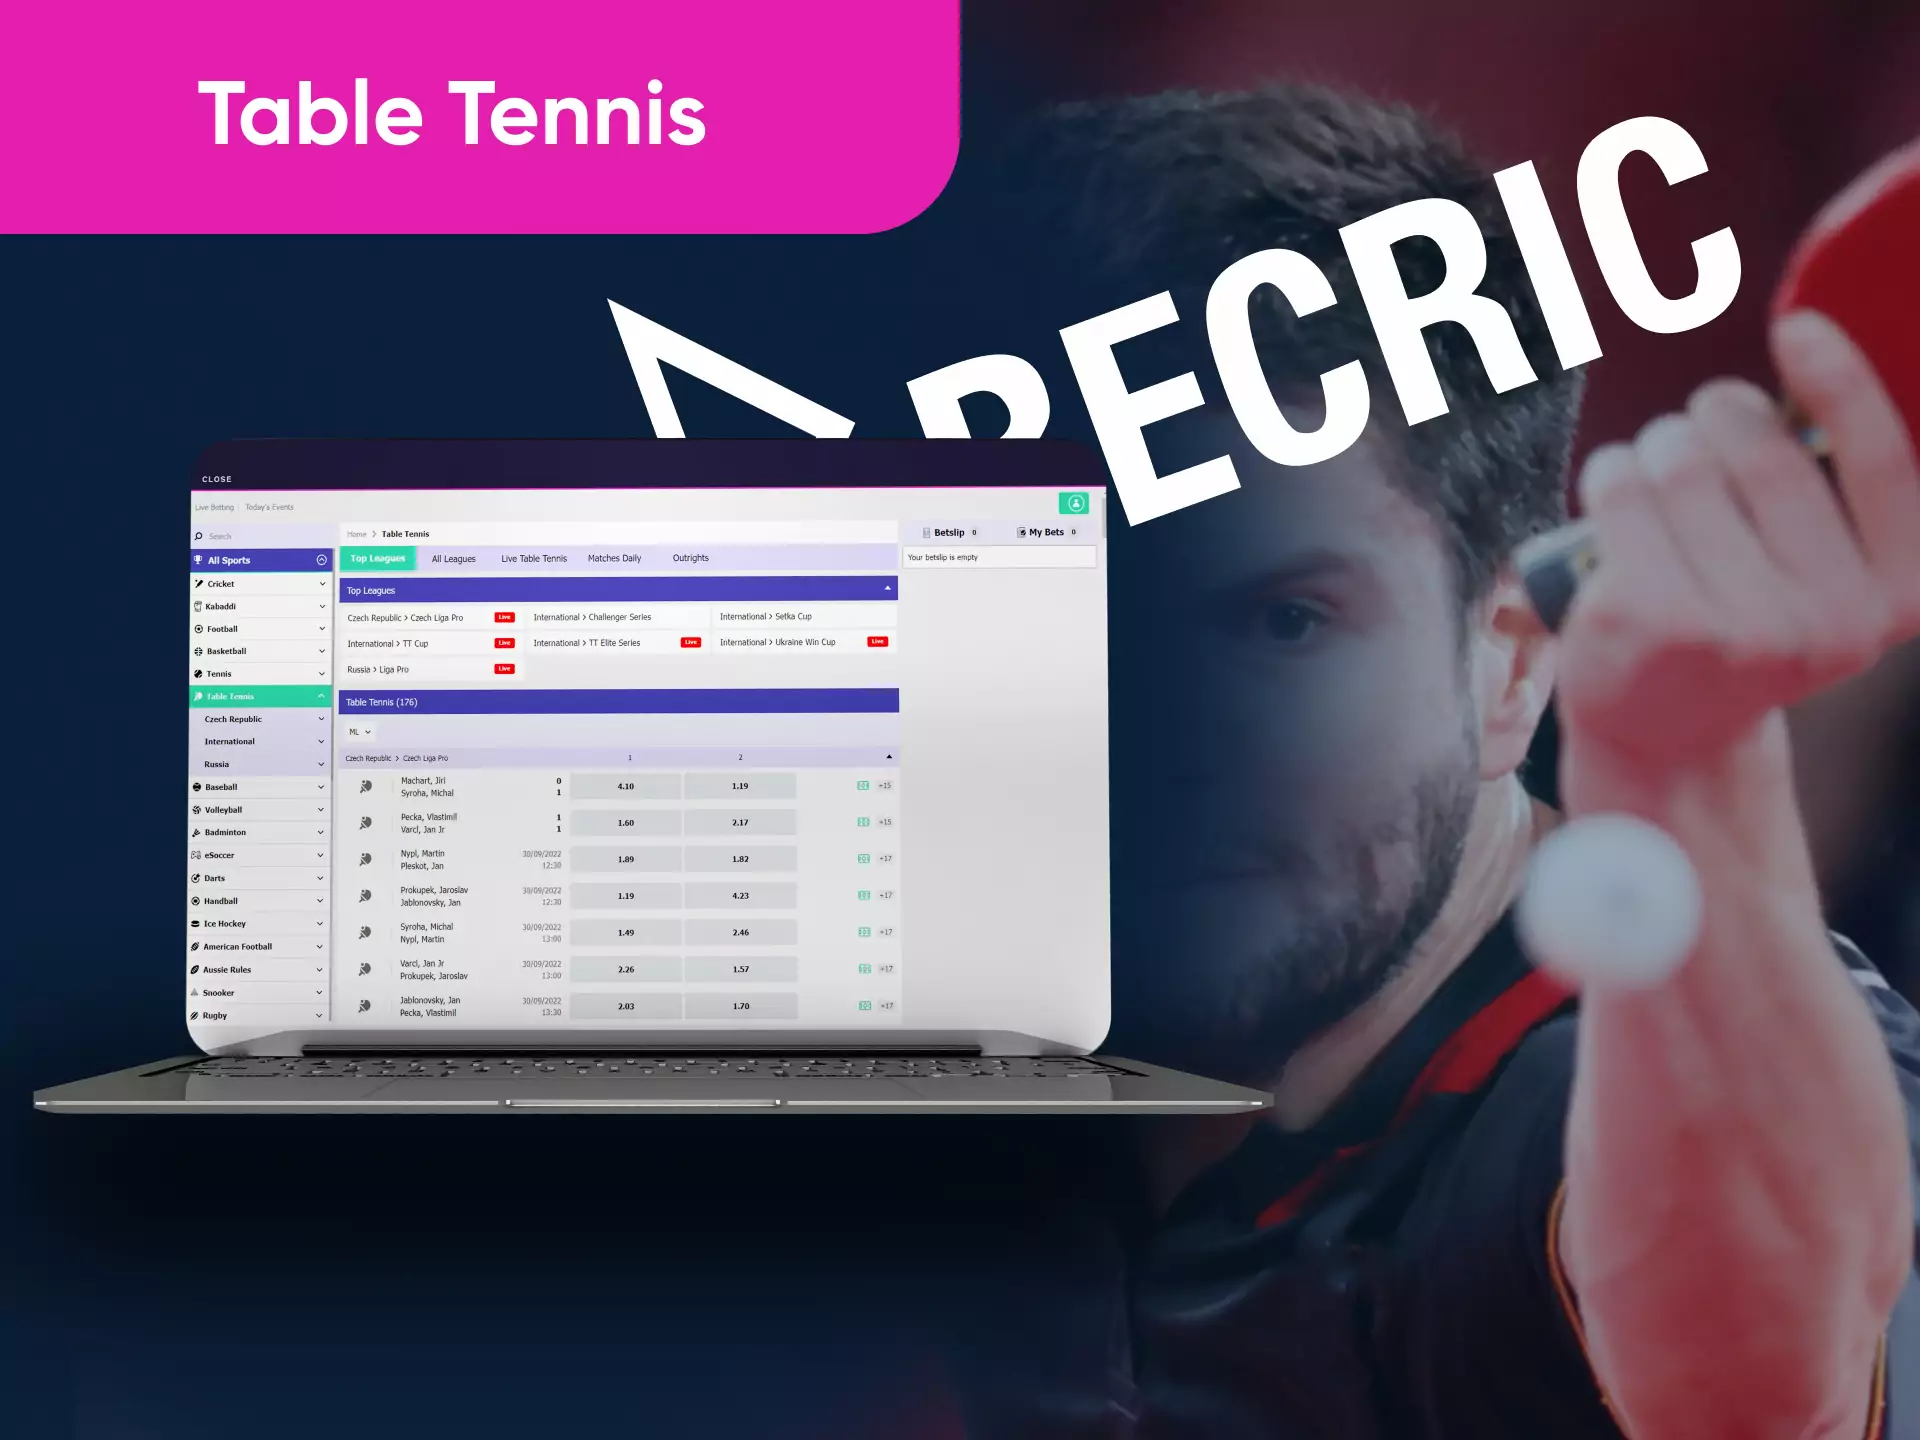 In the Becric sportsbook, users often place bets on table tennis events.